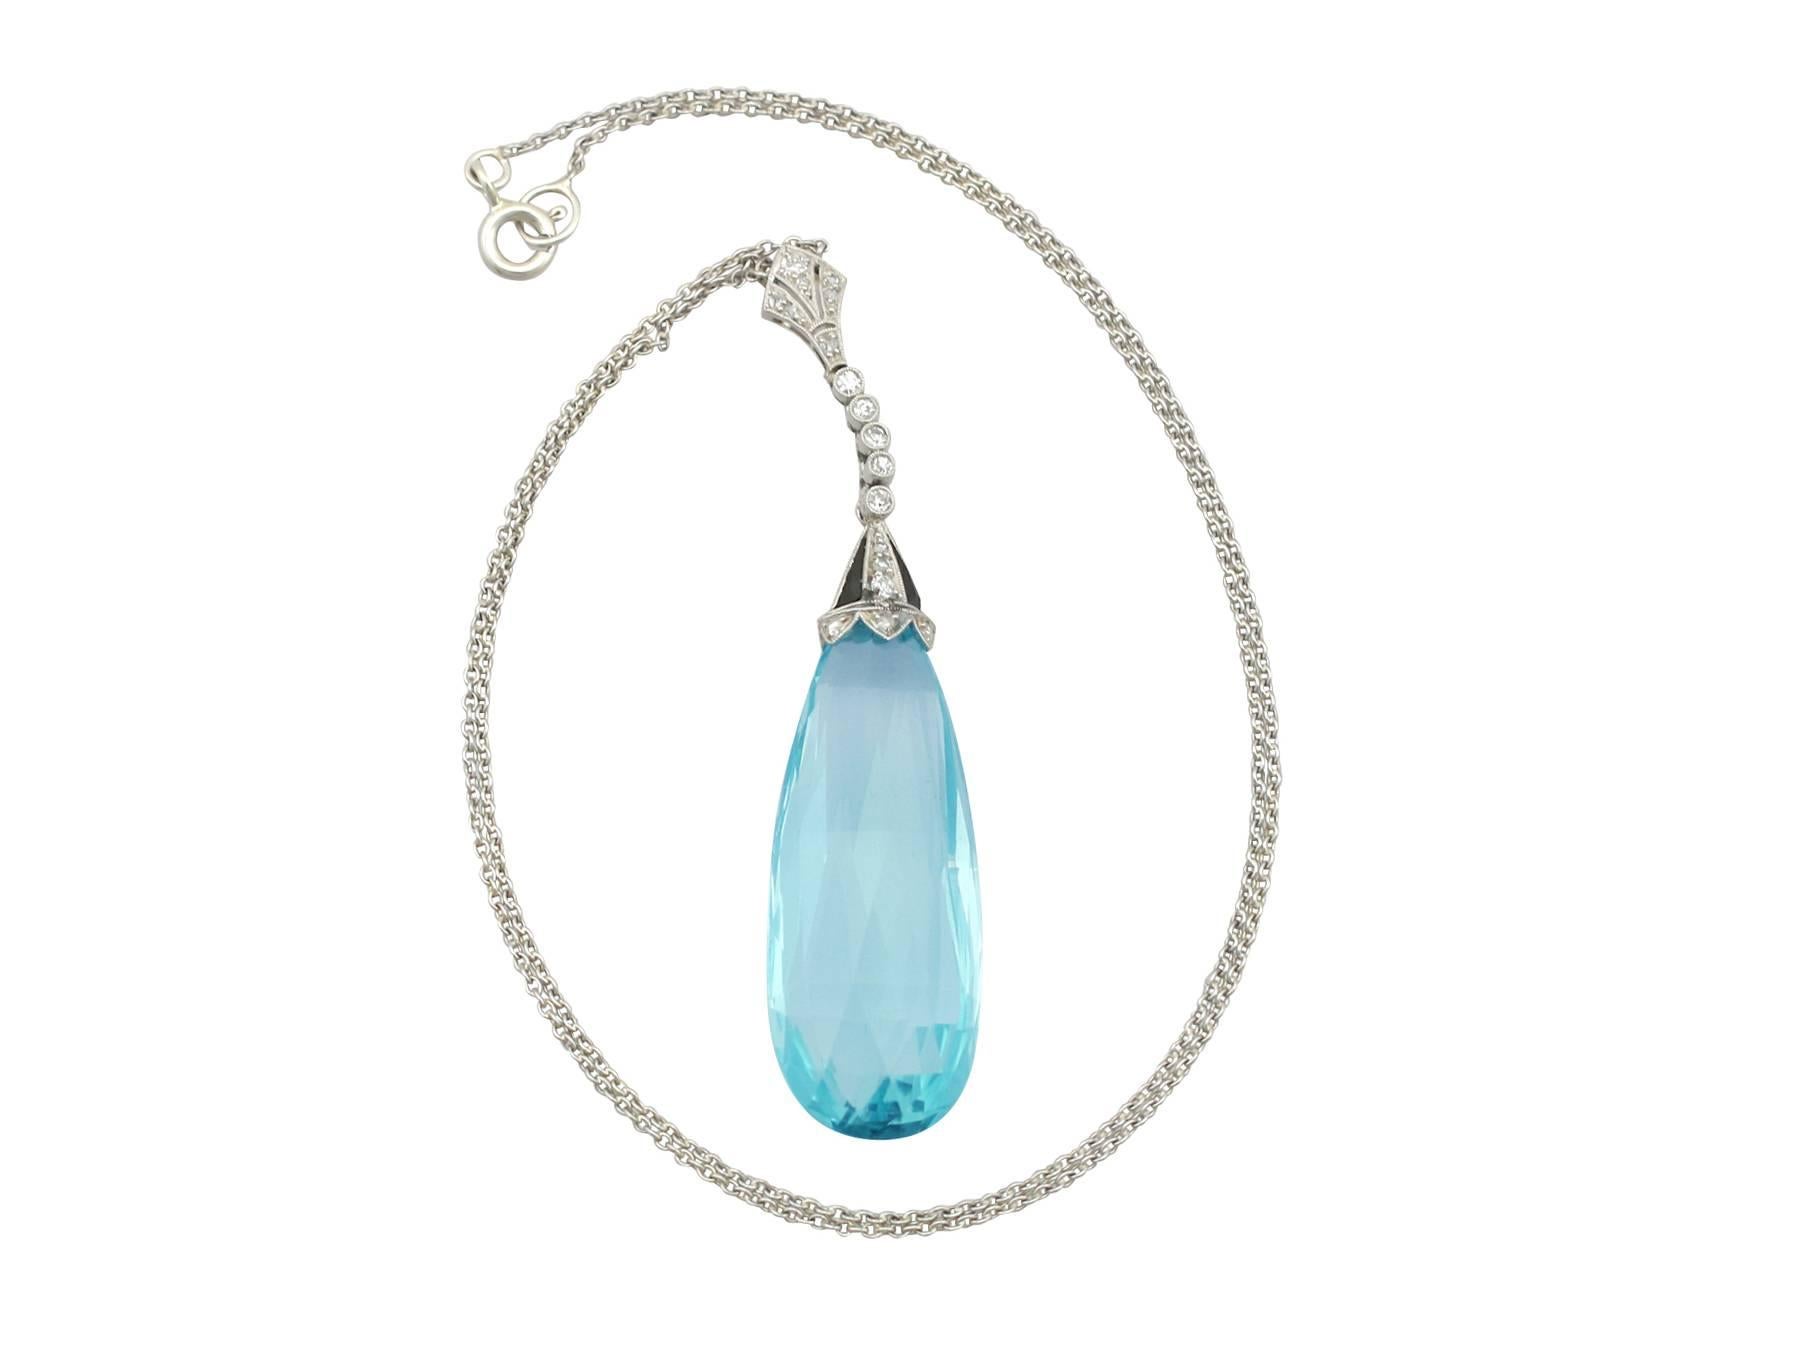 A stunning Art Deco 23.64 carat aquamarine and 0.26 carat diamond, platinum drop style necklace; part of our diverse antique jewelry and estate jewelry collections

This stunning, fine and impressive large aquamarine pendant has been crafted in